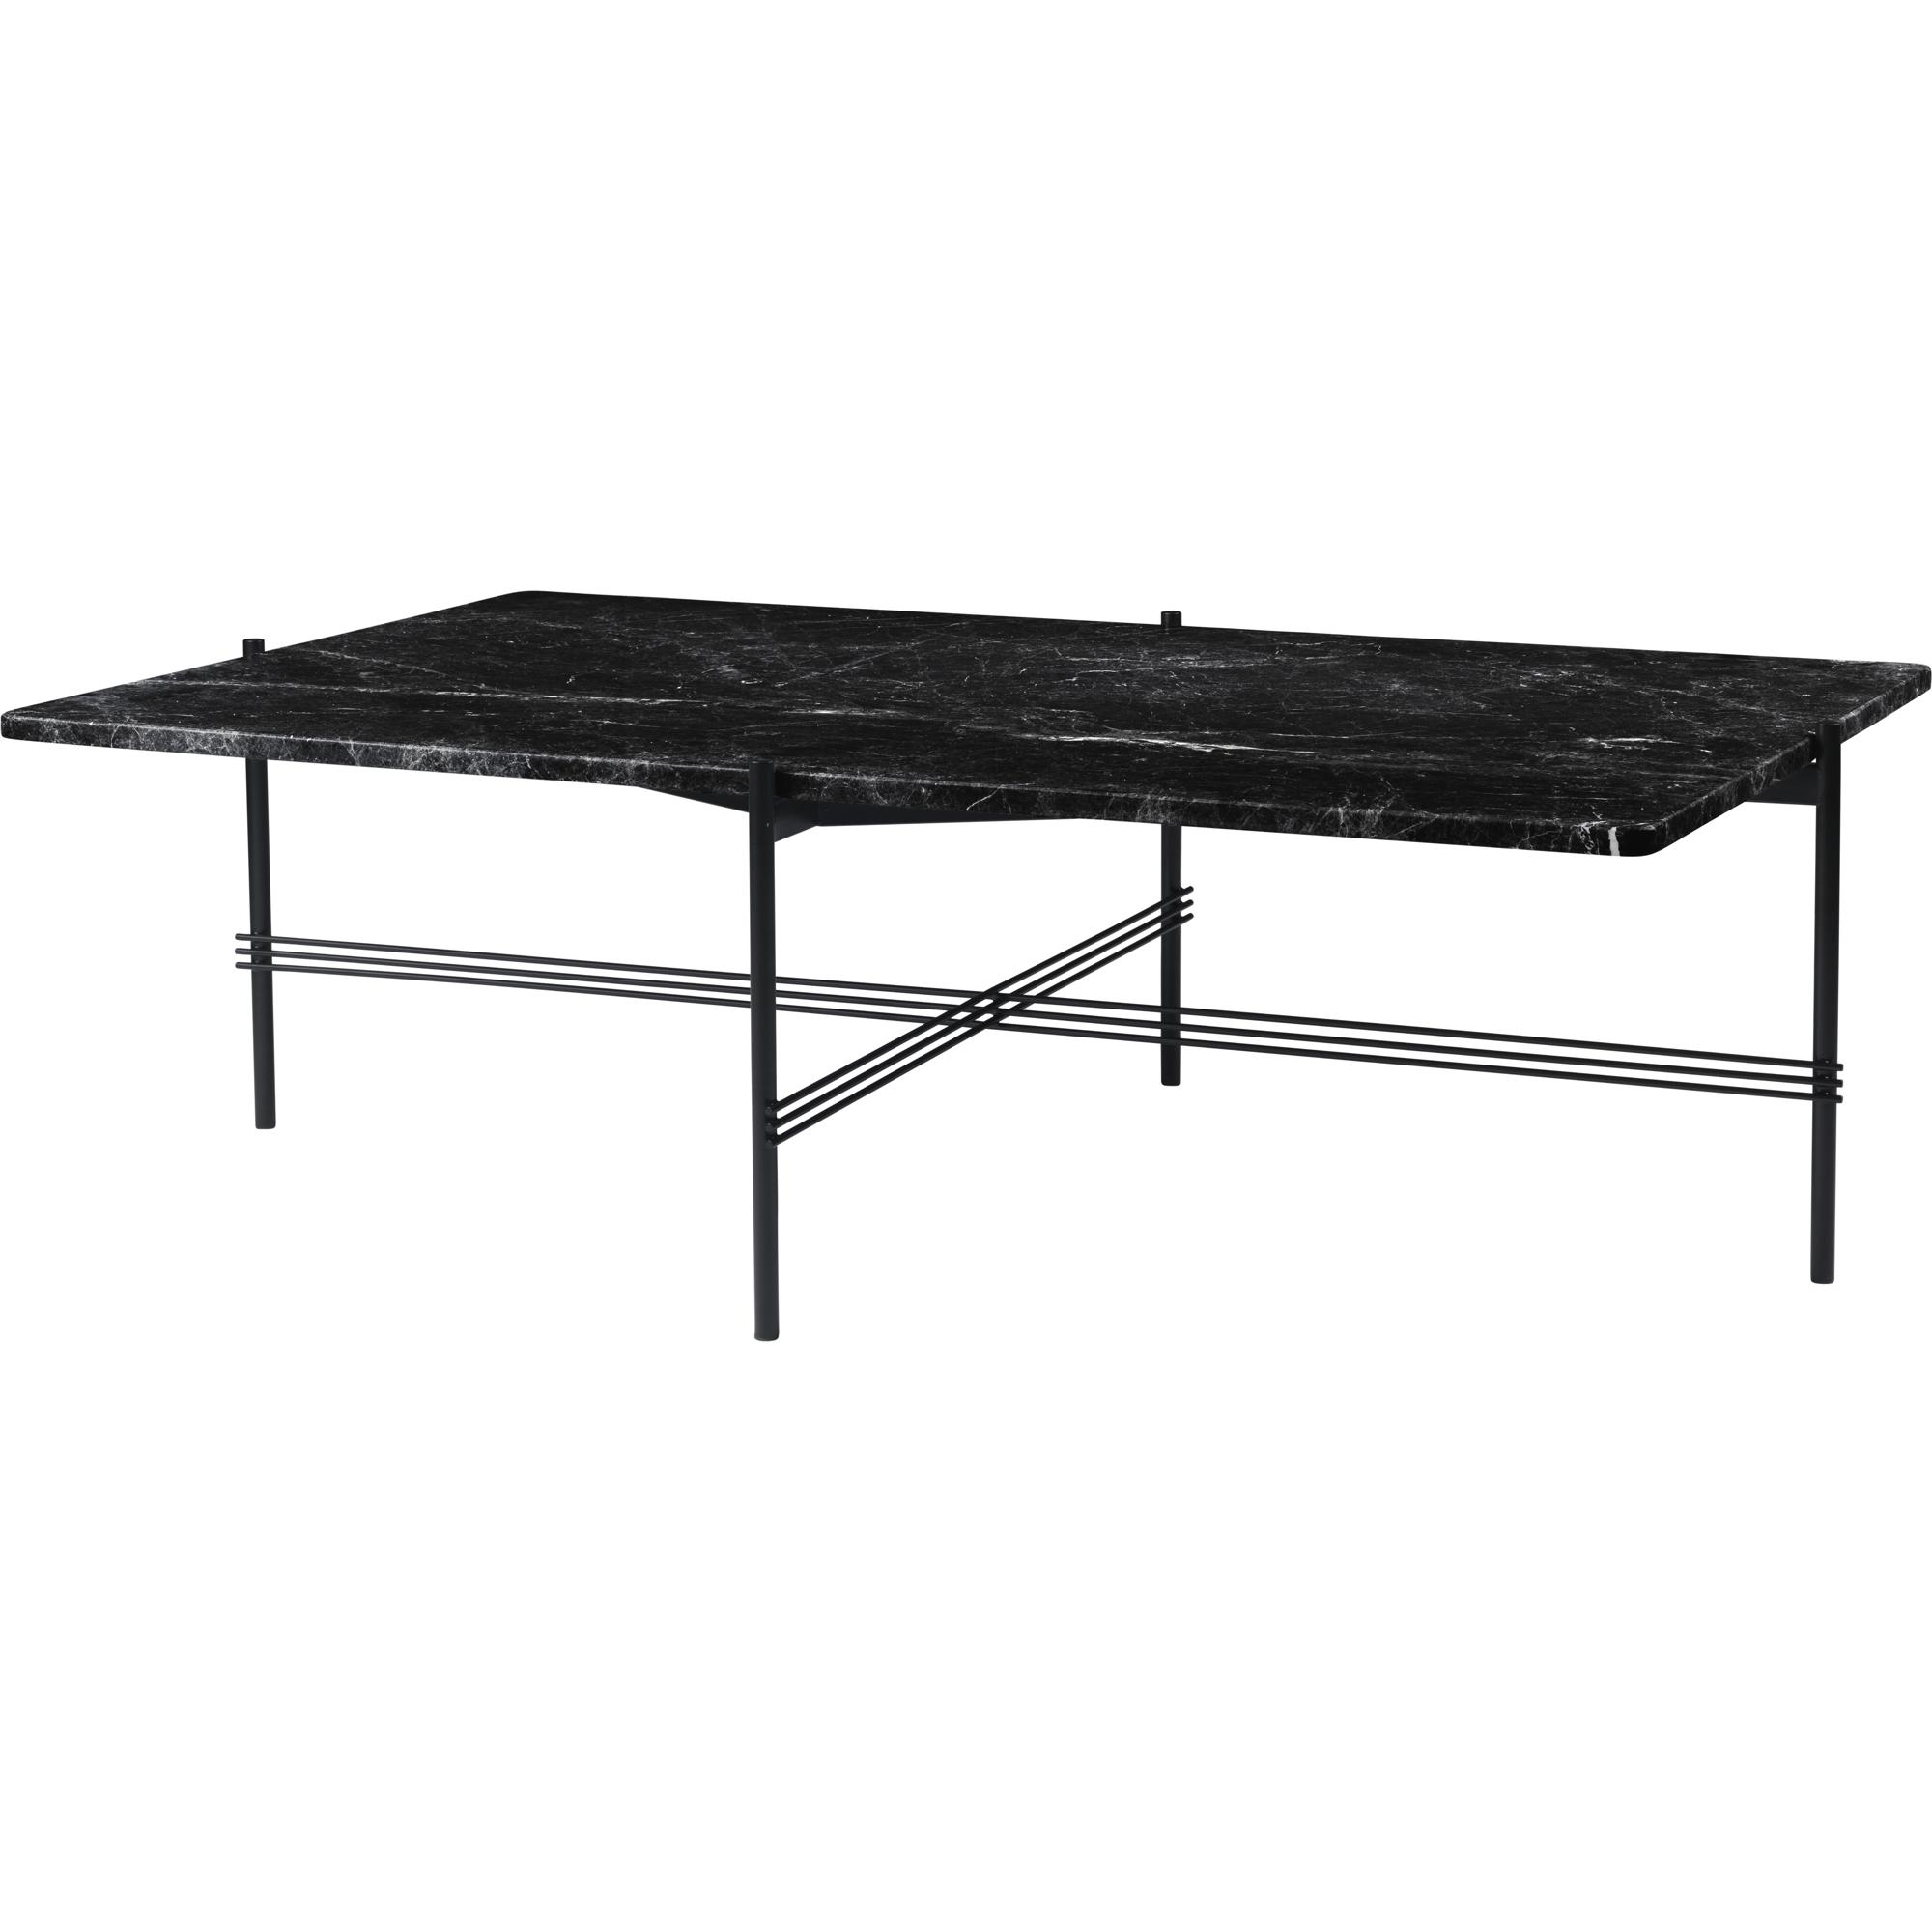 GUBI TS Coffee Table Rectangular 130 x 80 cm w. Black Base and Black Marquina Marble Top